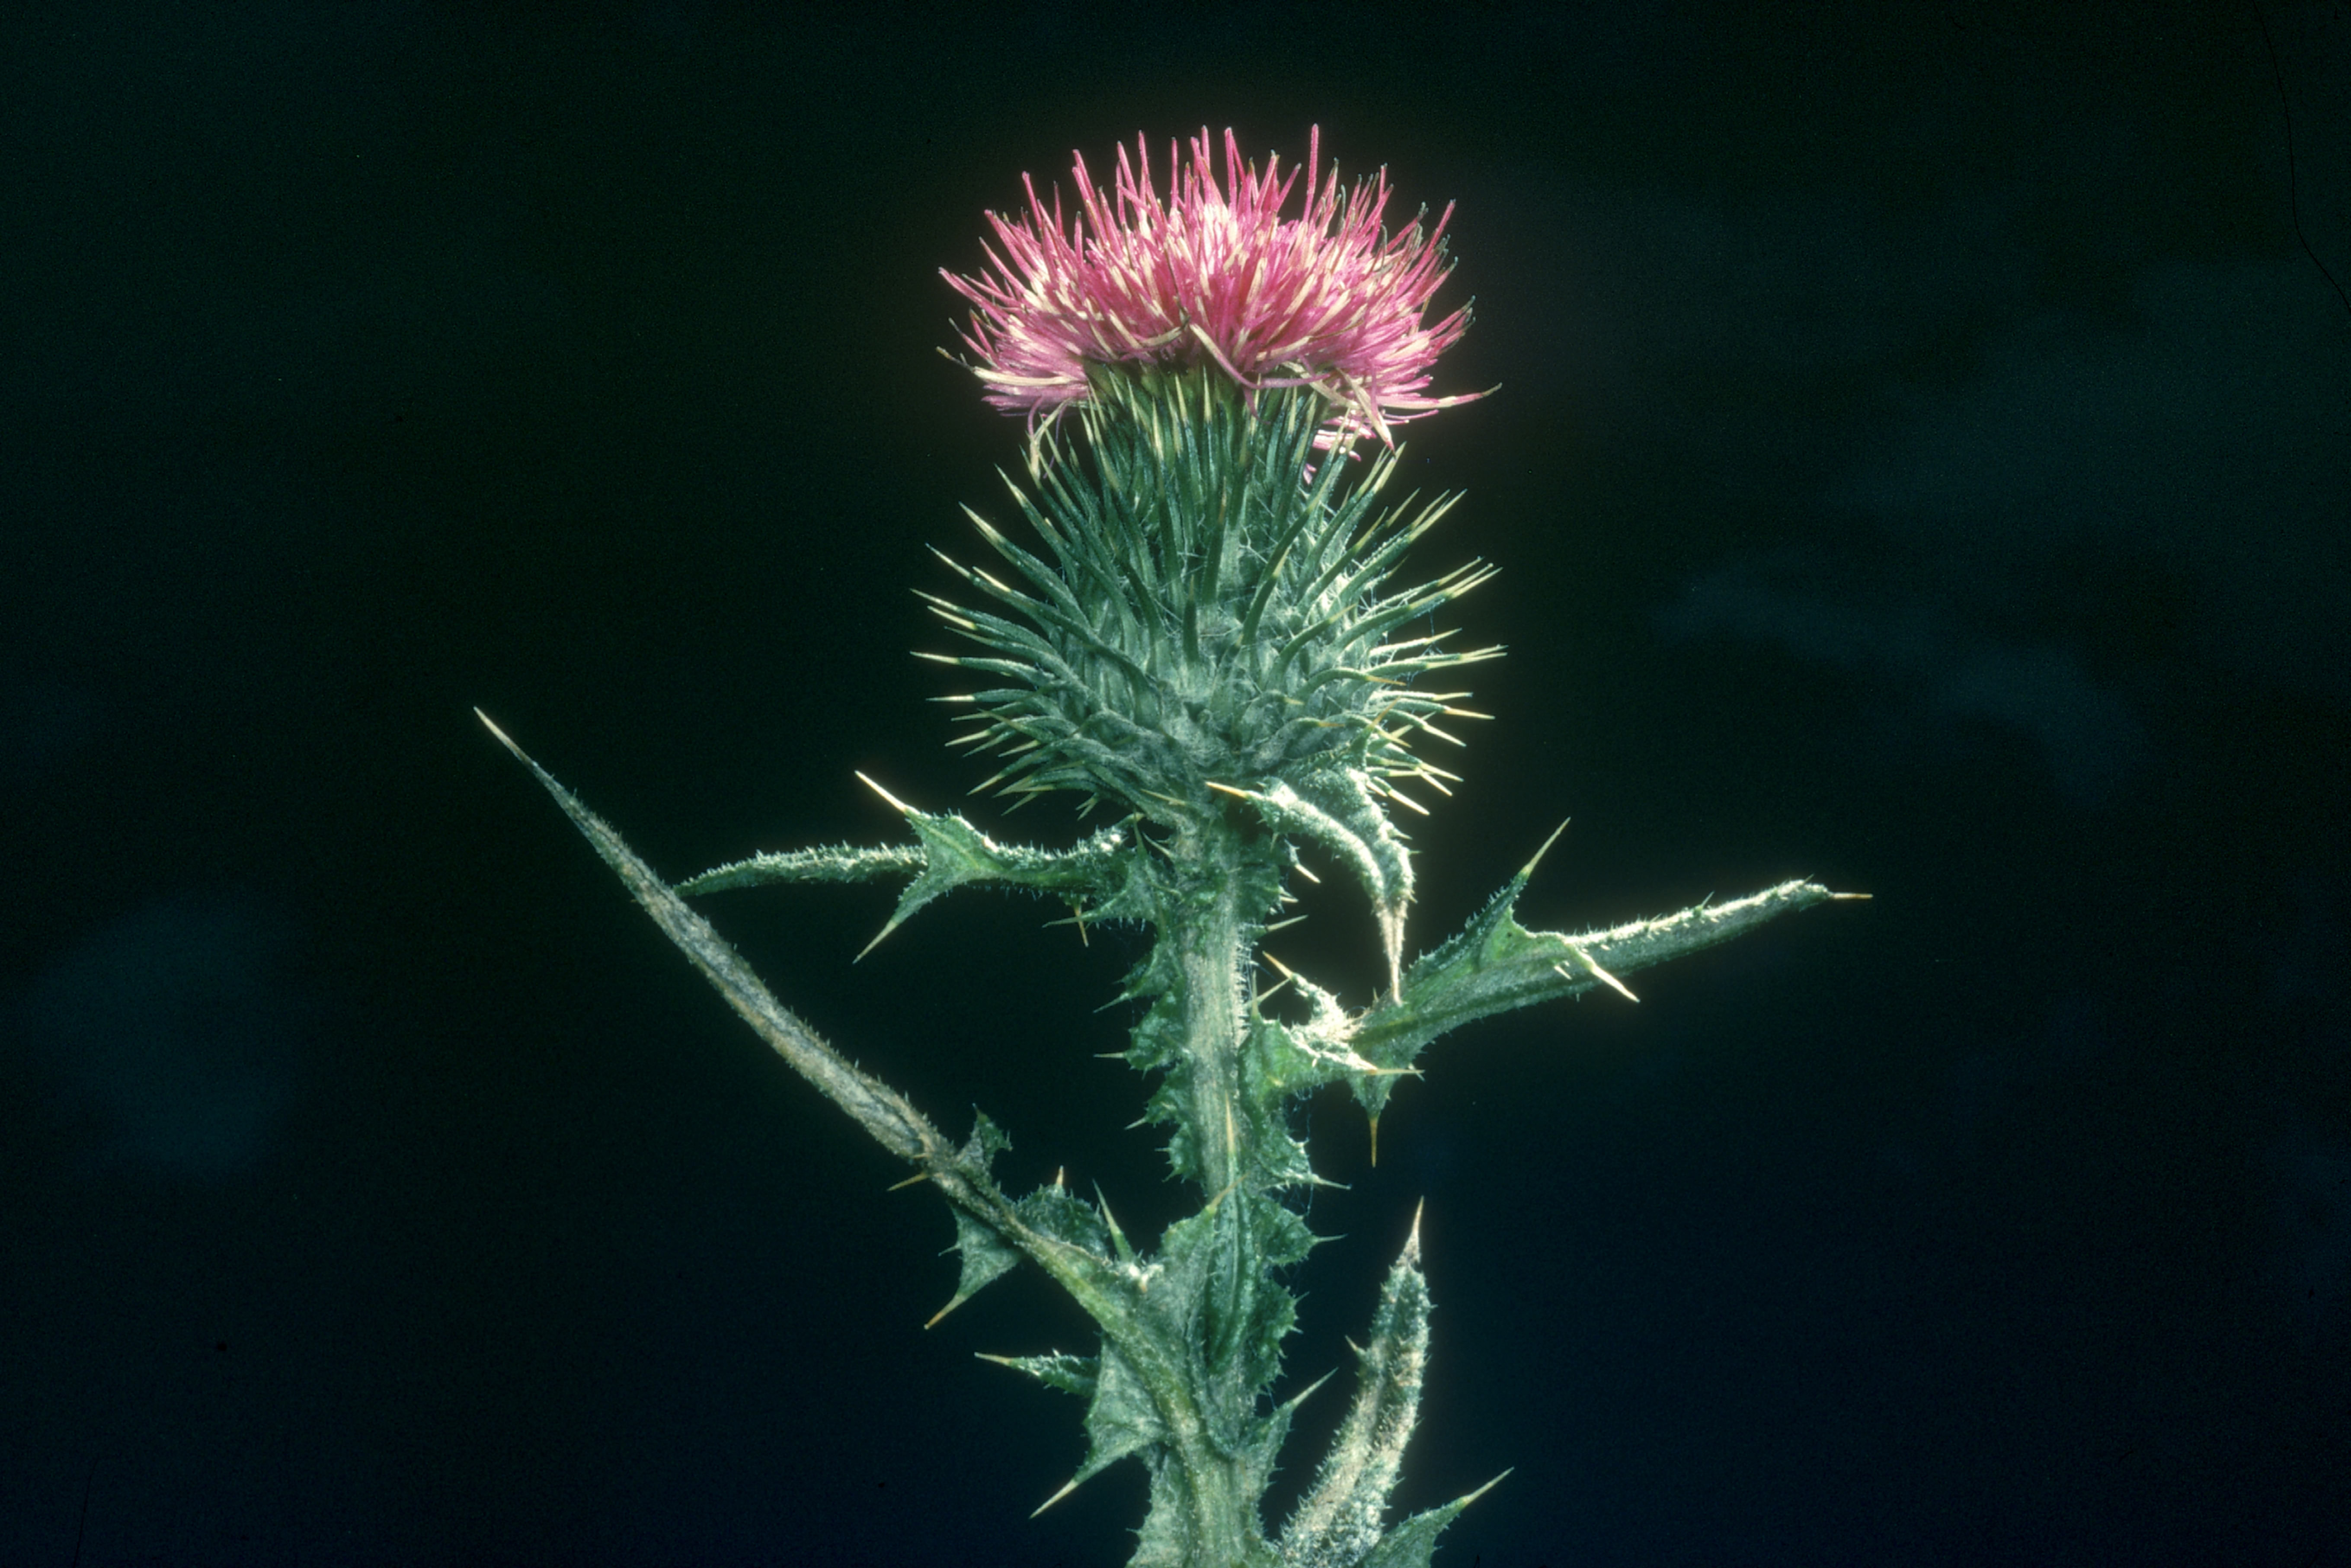 russian thistle flower